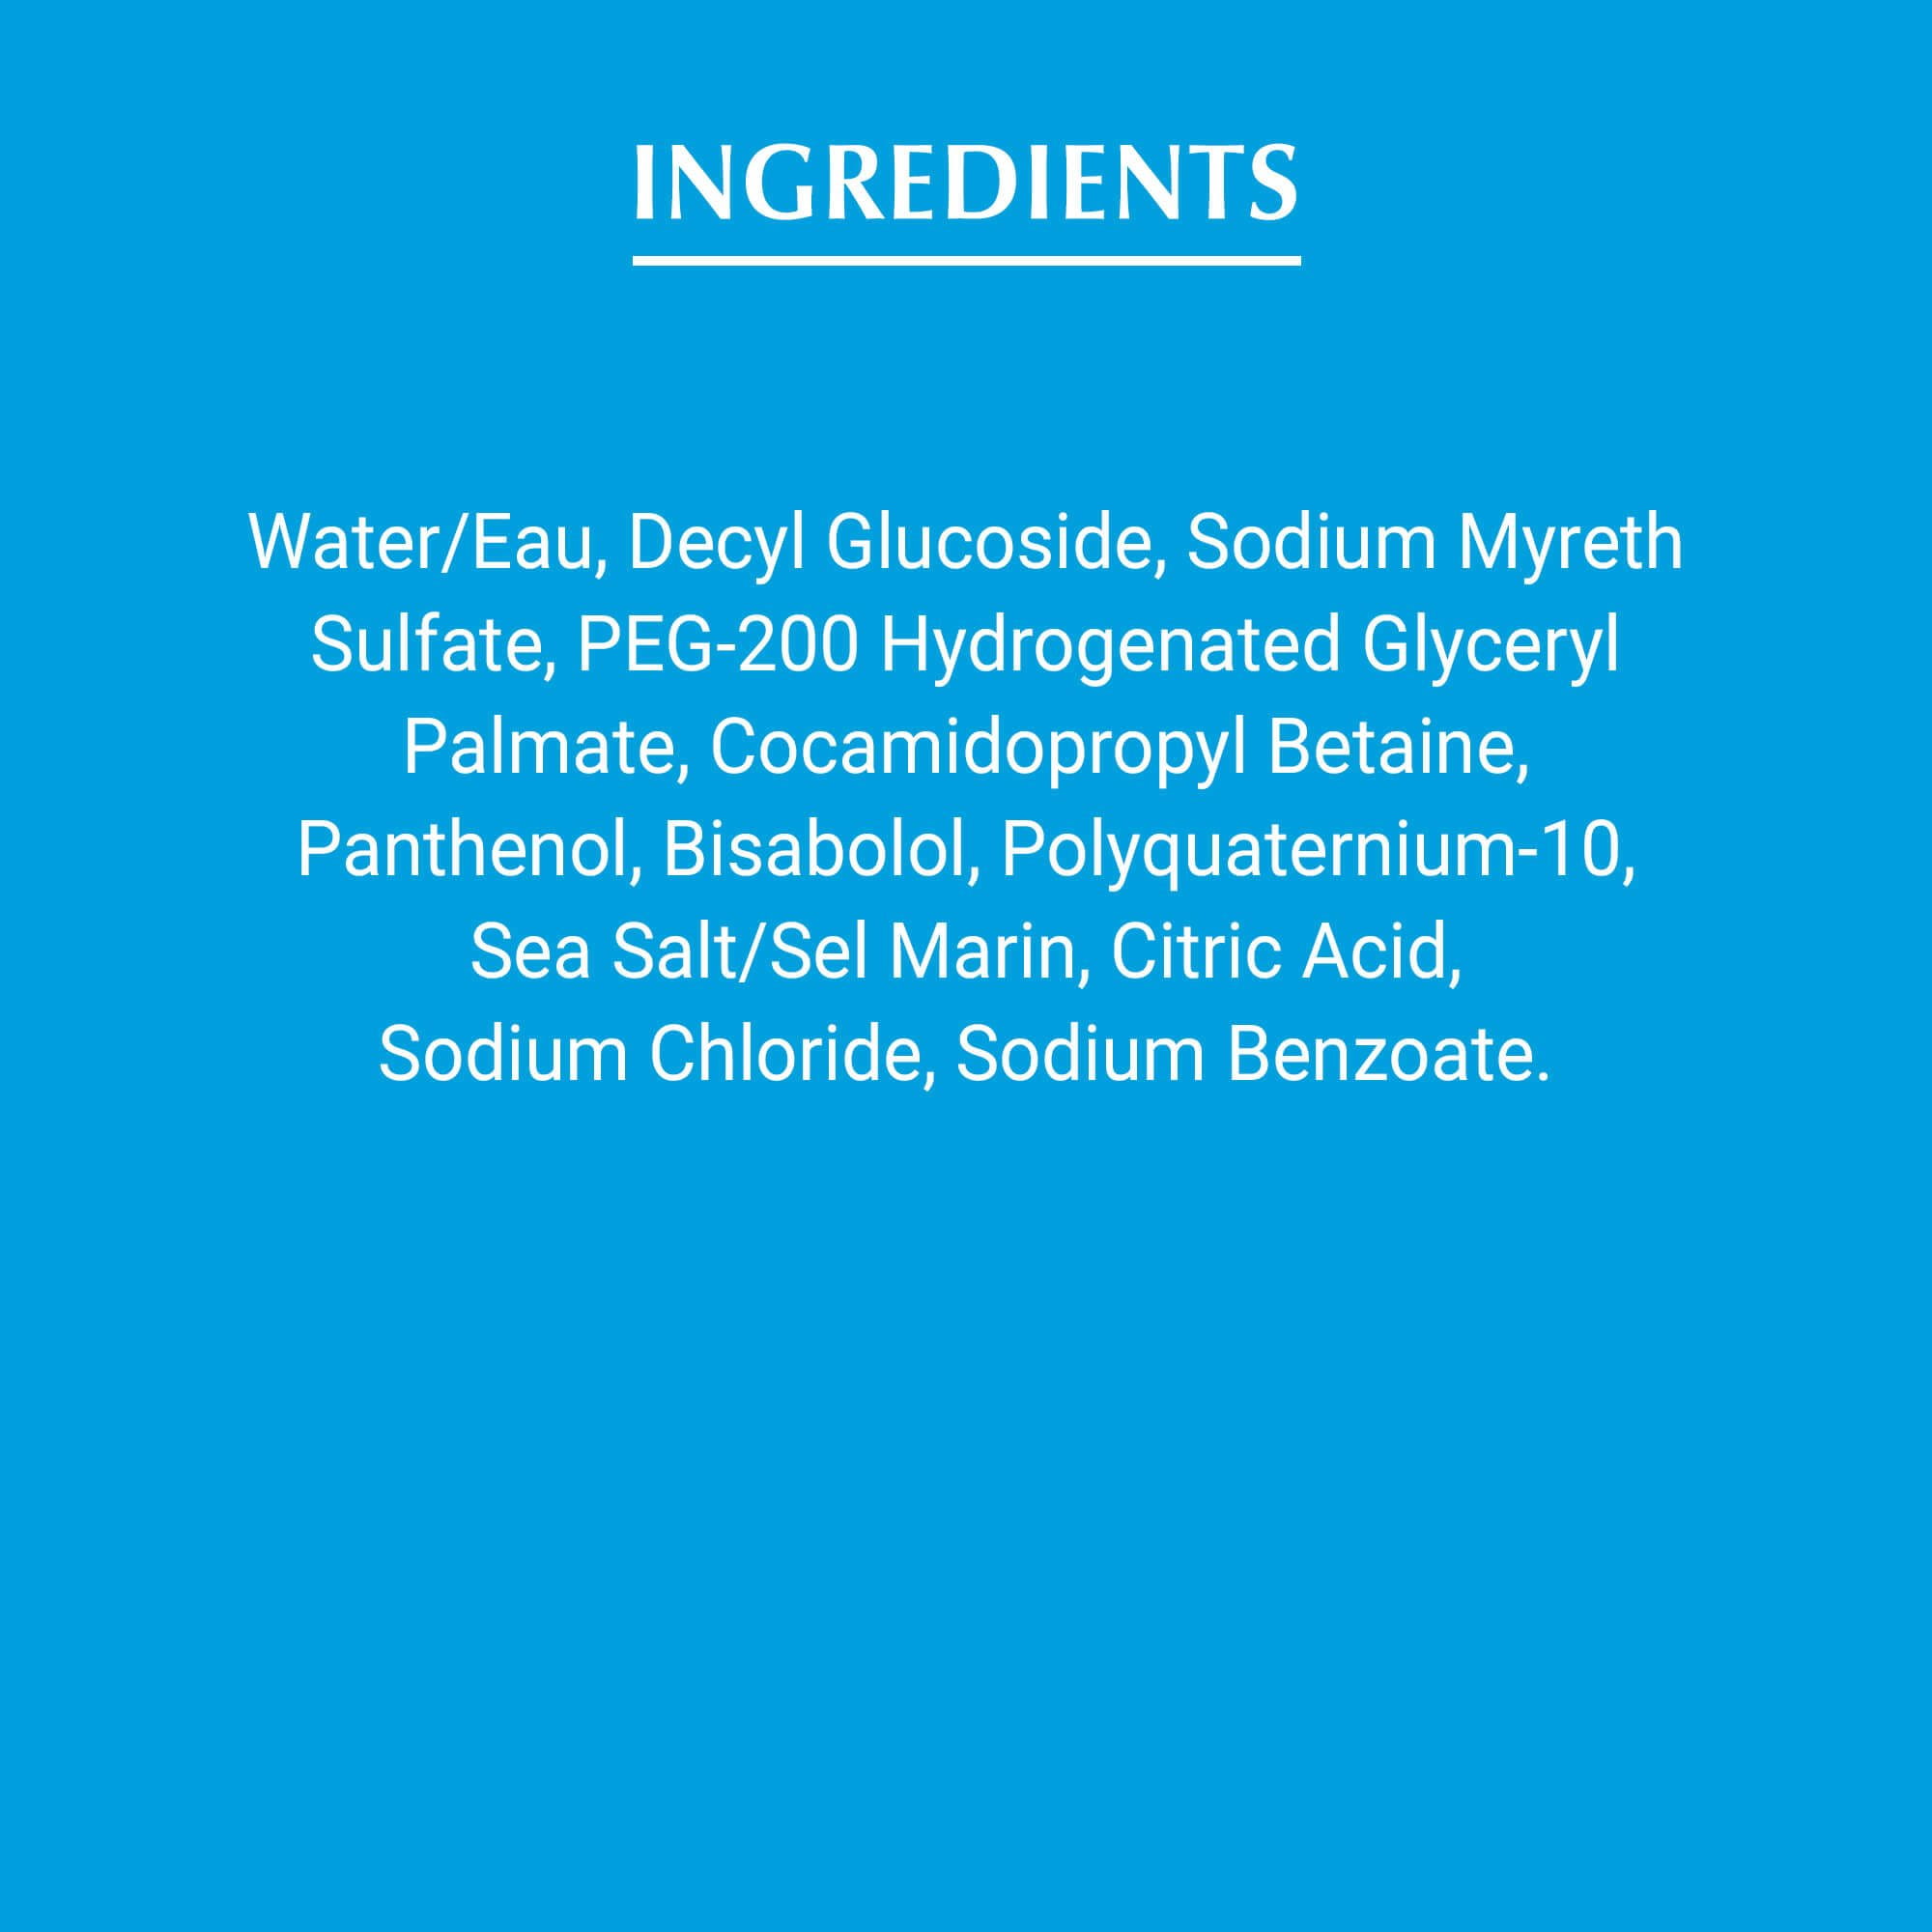 View of Eucerin Aquaphor baby wash and shampoo product ingredients list text in white font against a blue background.